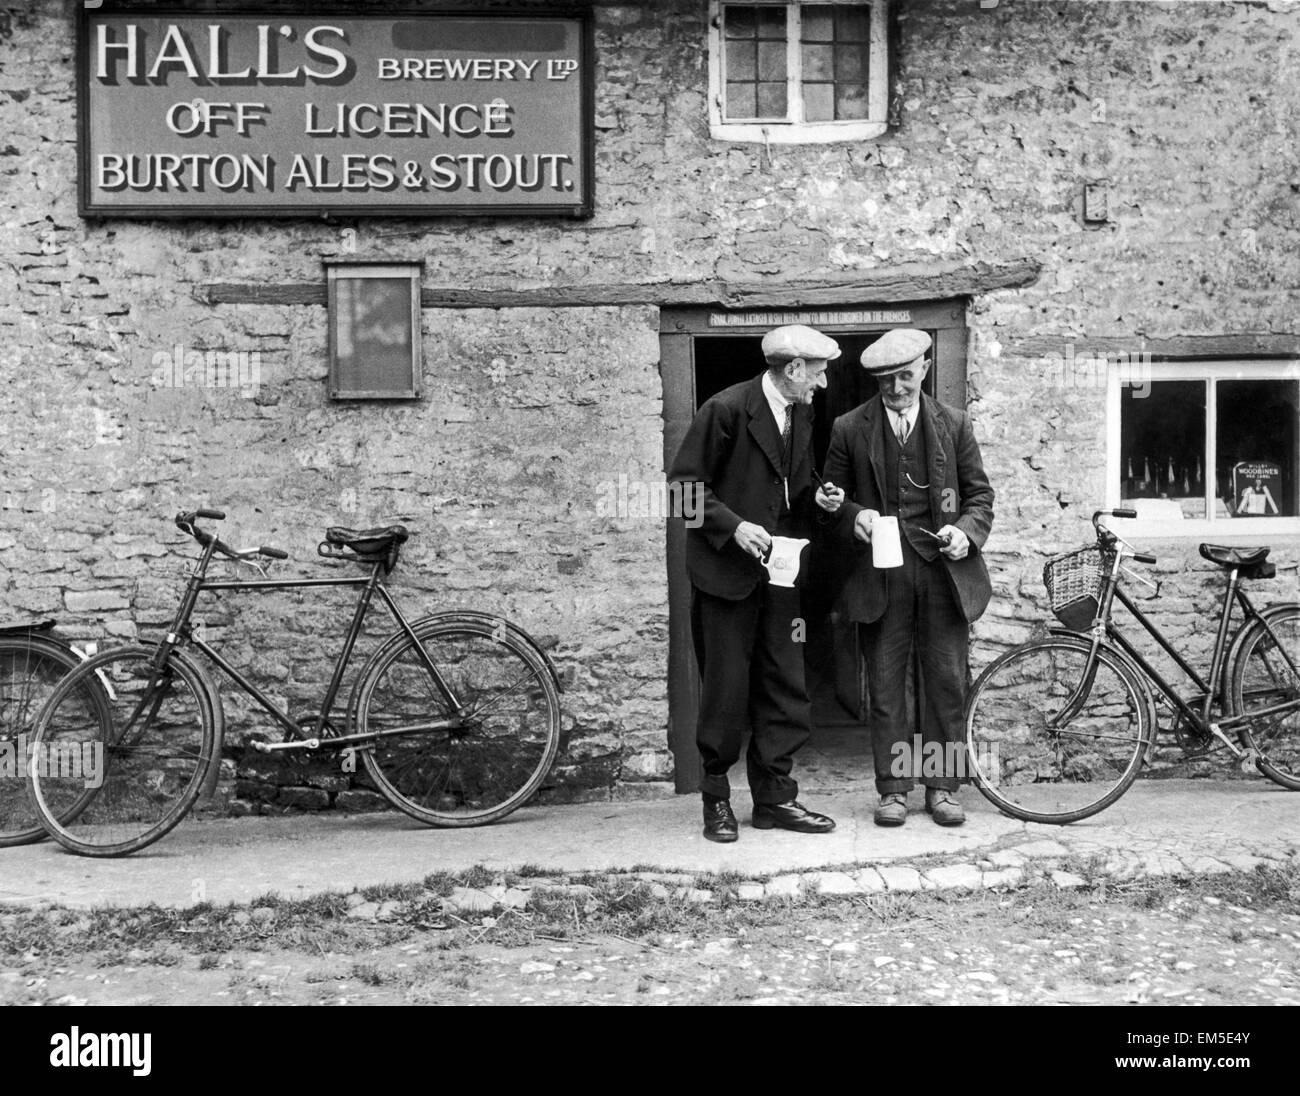 halls-brewery-off-licence-burton-ales-stout-in-bucknell-oxford-the-EM5E4Y.jpg